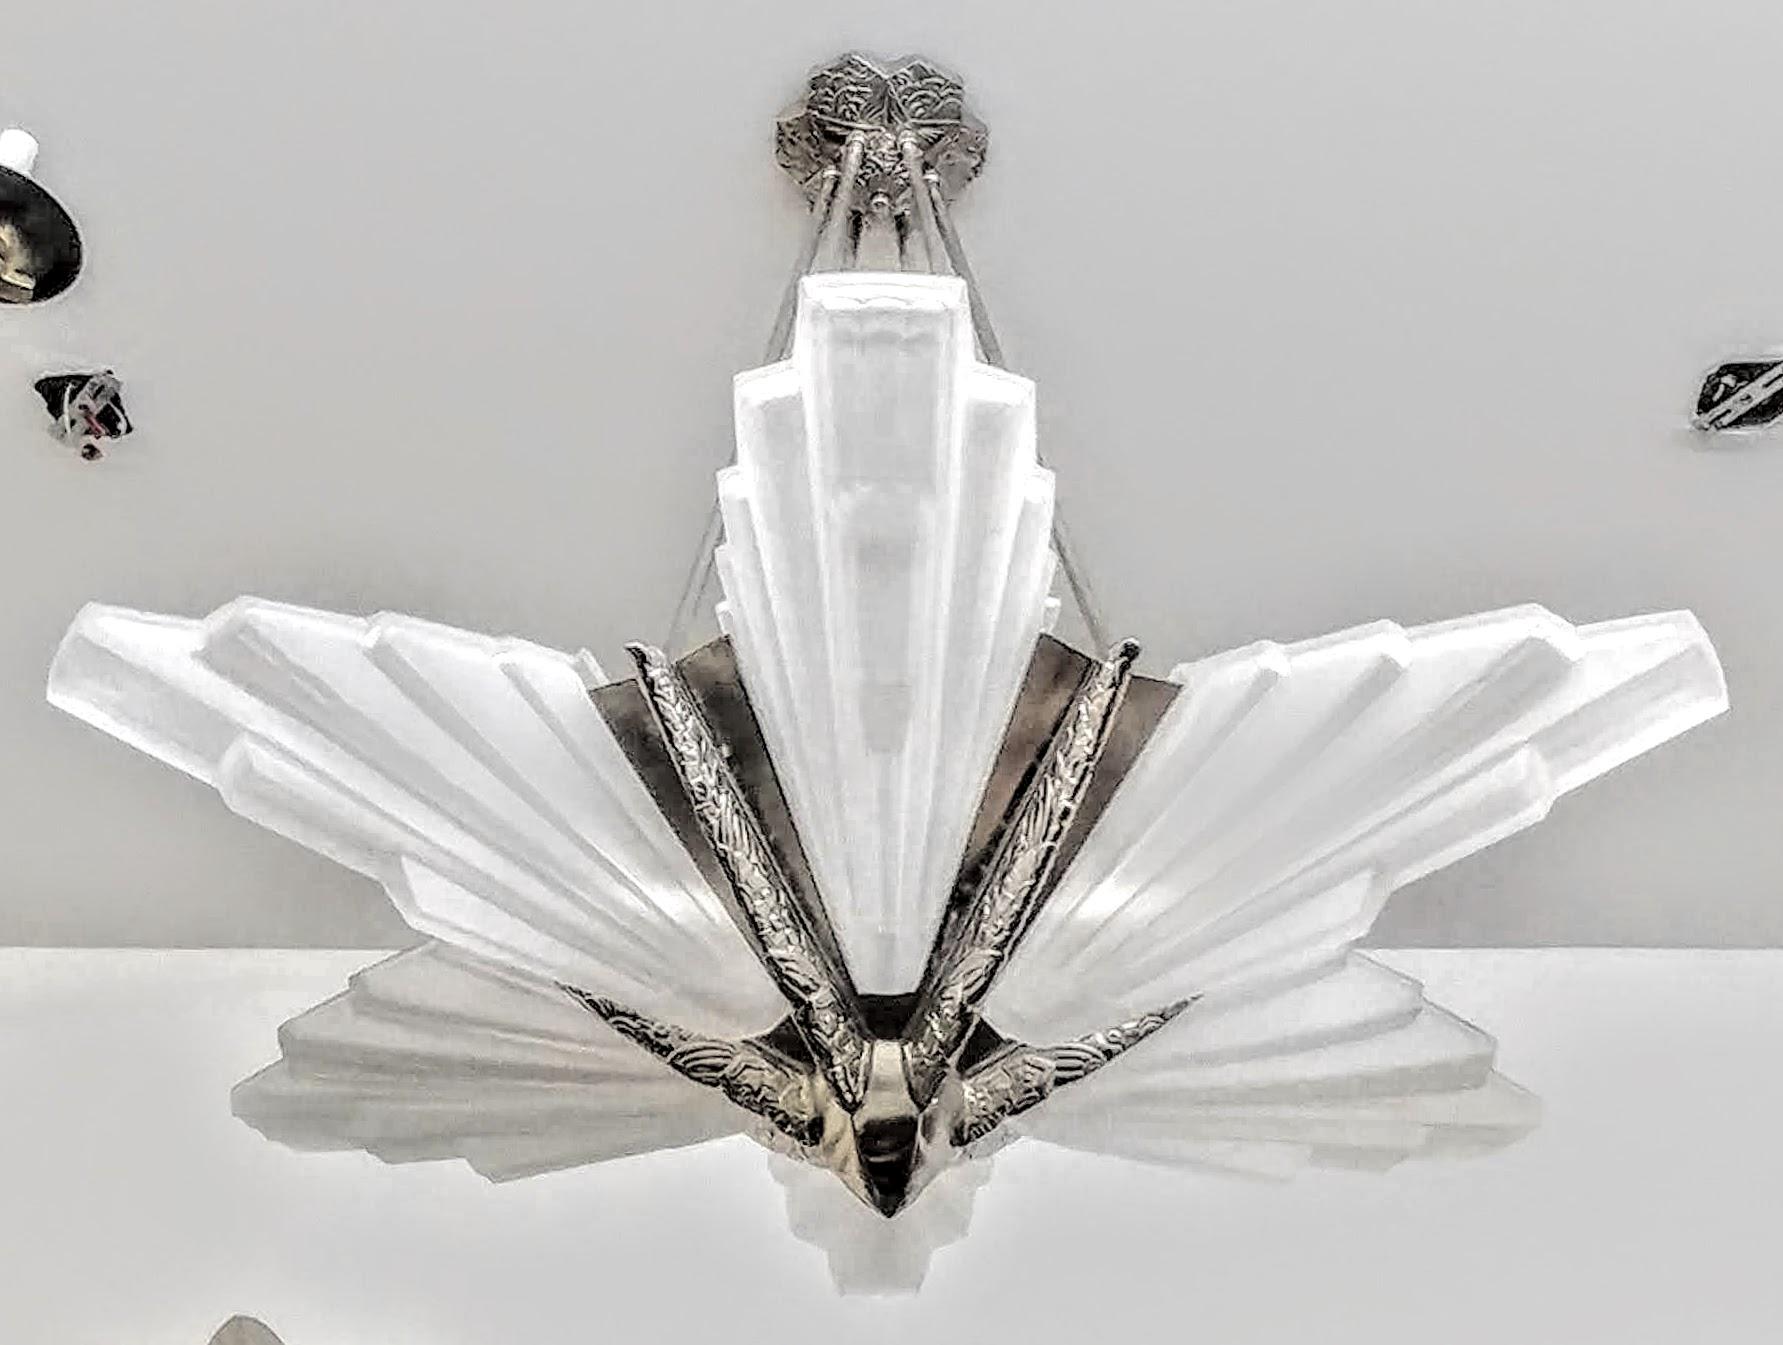 A stunning French Art Deco chandelier created on a grand scale (42